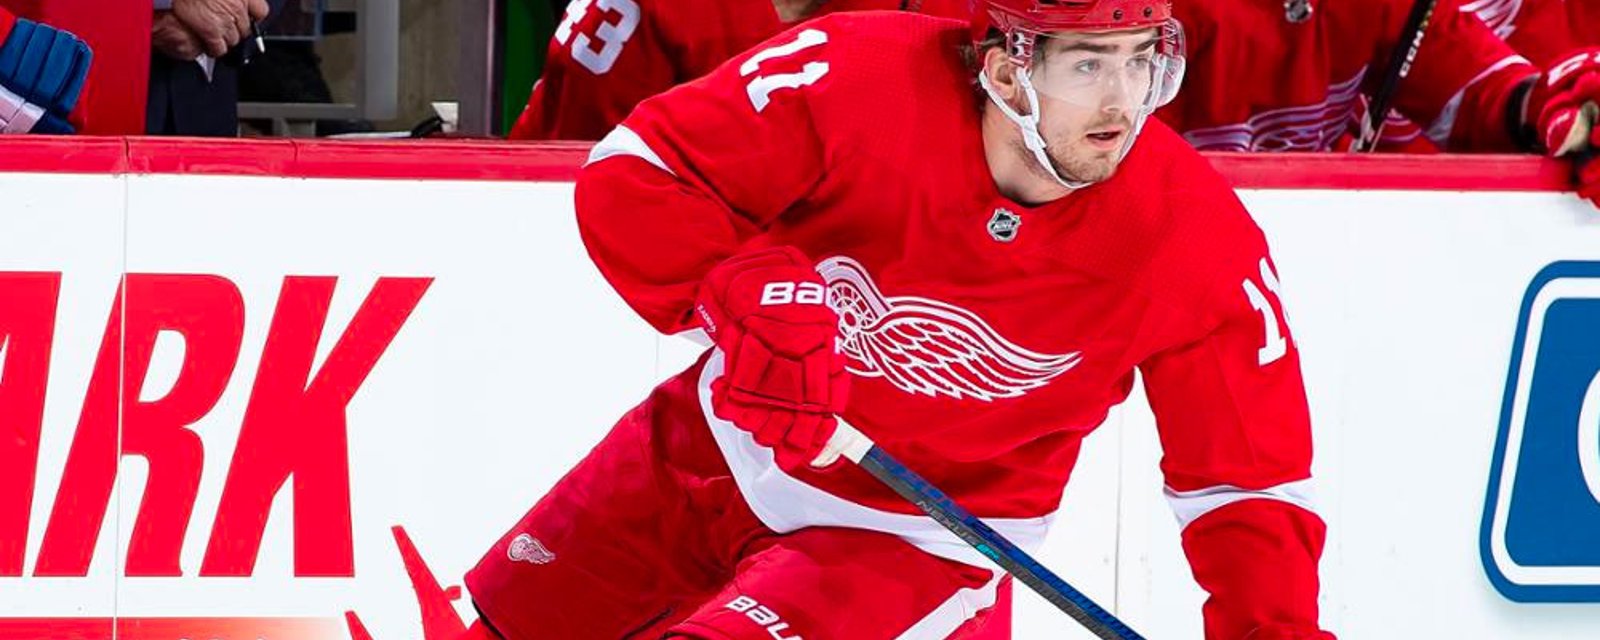 Report: Zadina gave up on the Red Wings before Yzerman dumped him on waivers